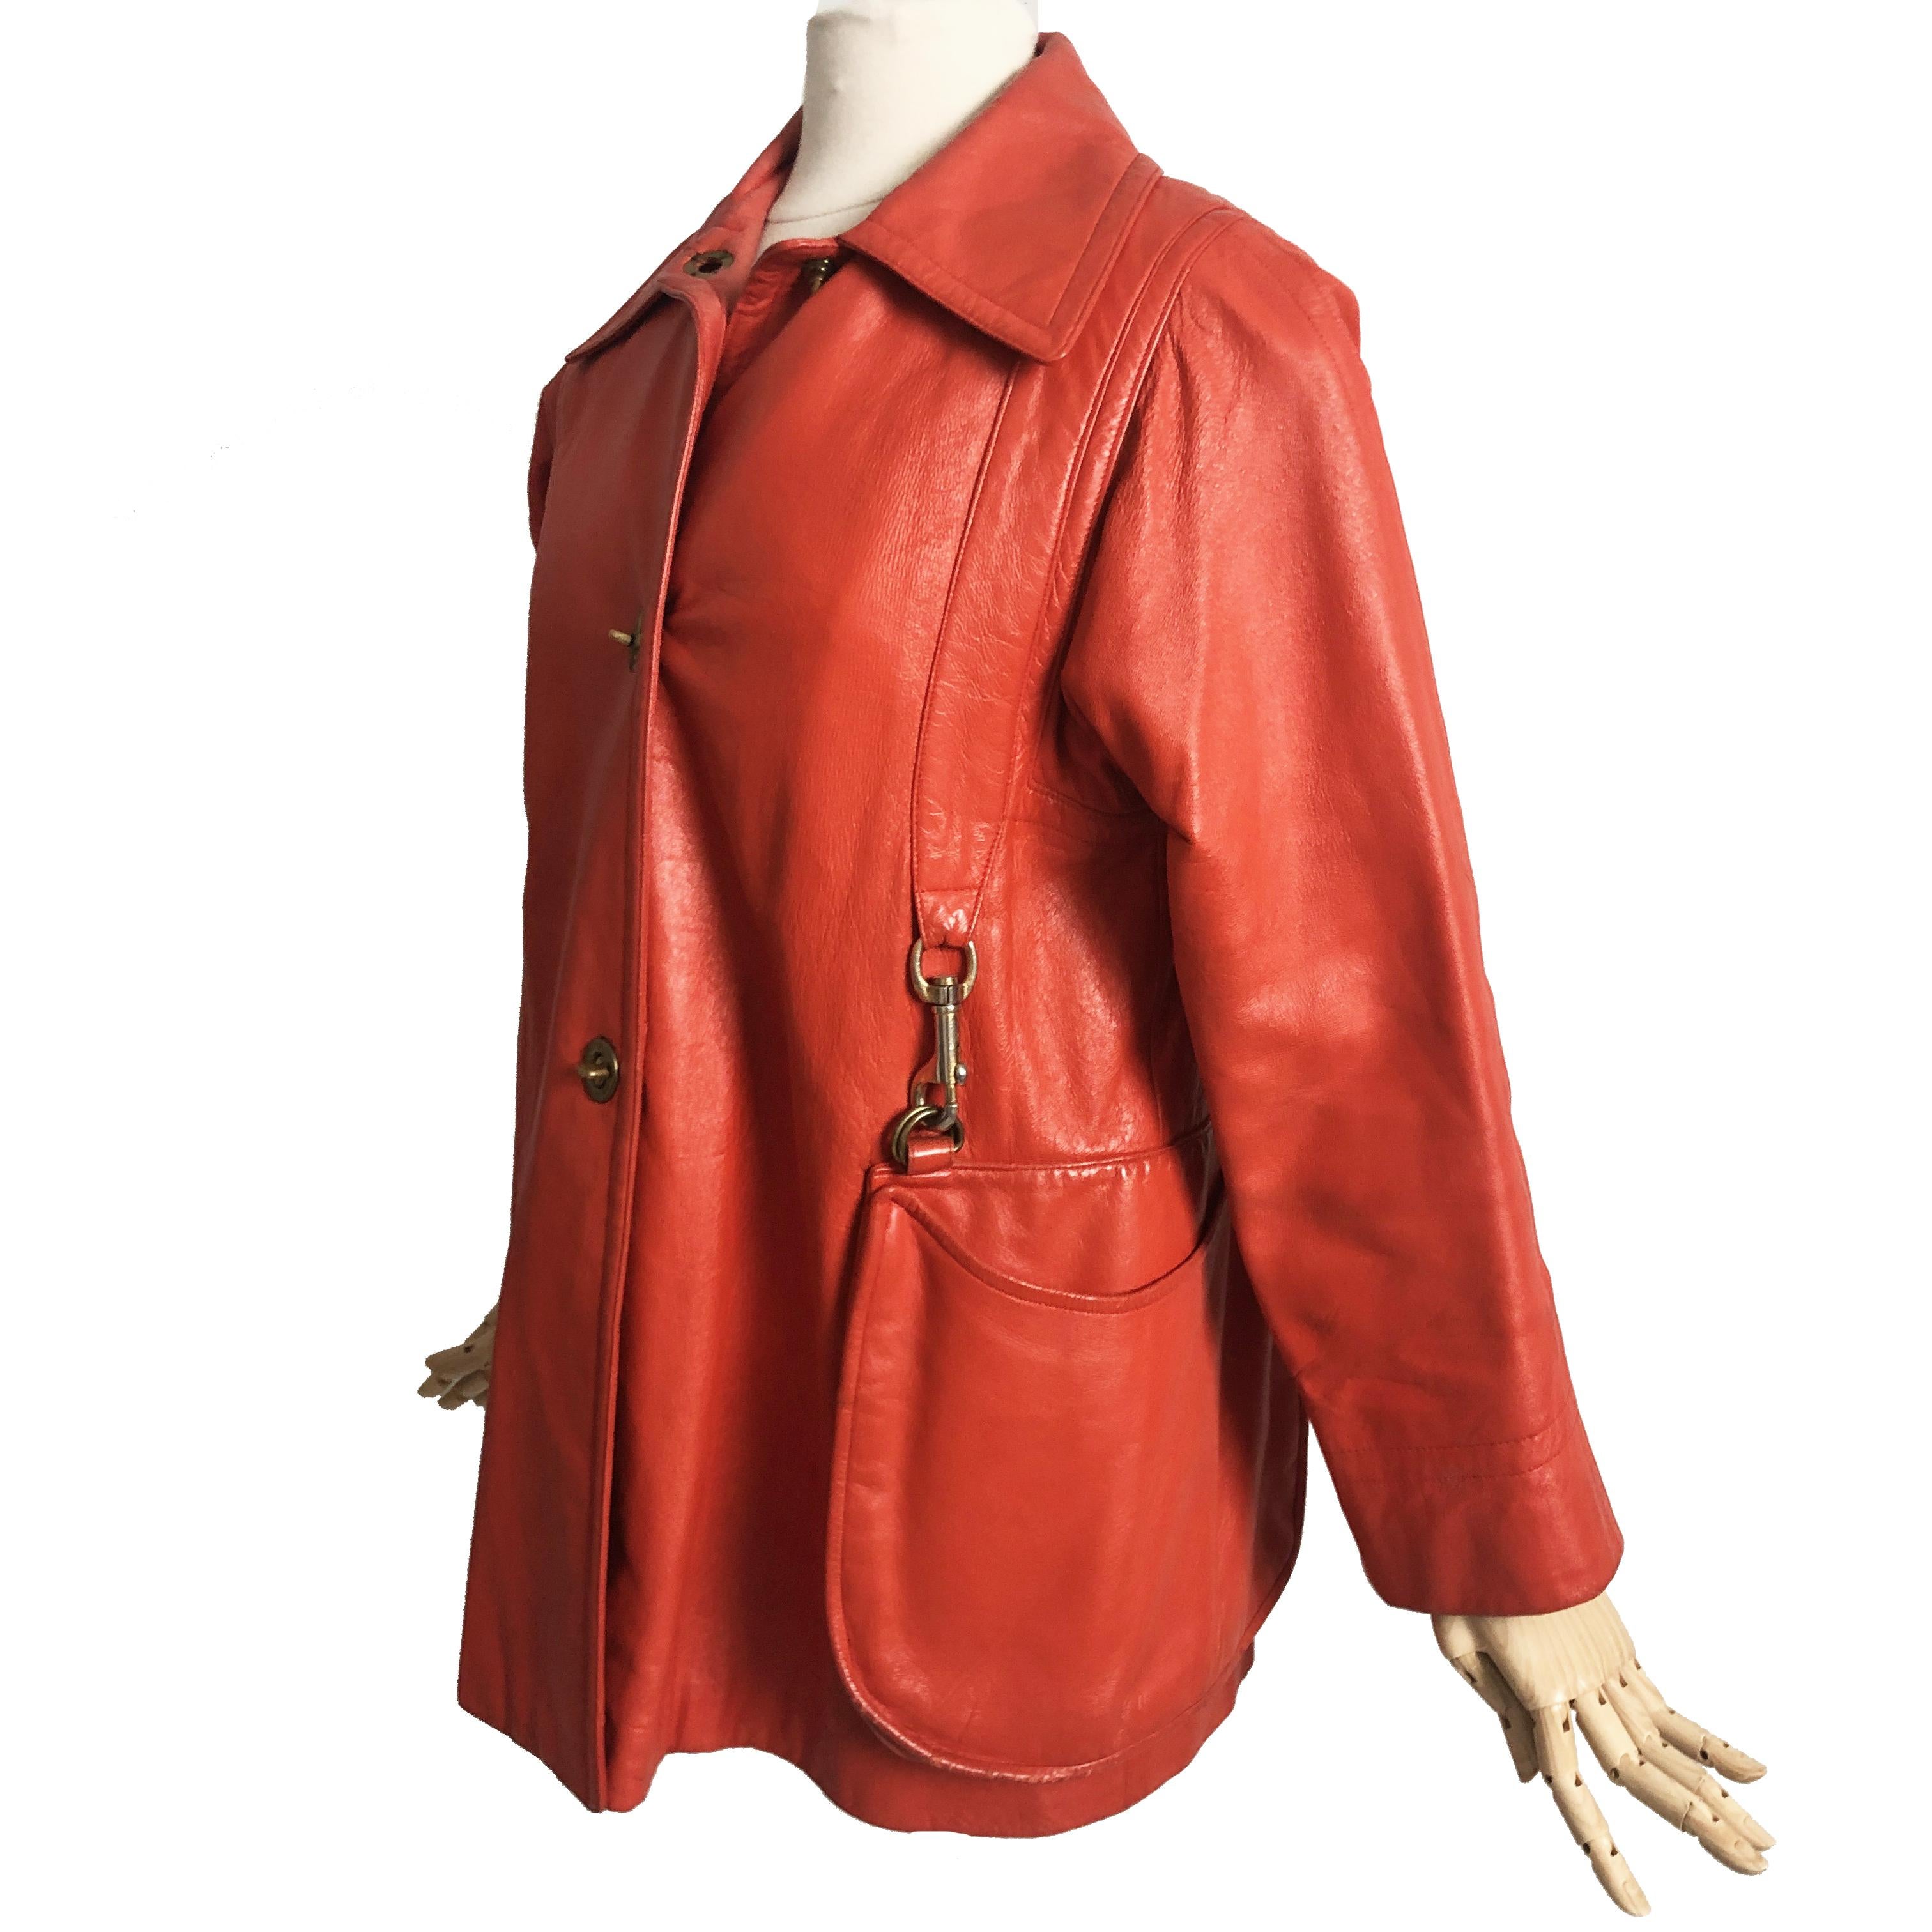 Red Bonnie Cashin Leather Jacket with Attached Hobo Bag Size S Mod Vintage 60s Rare 